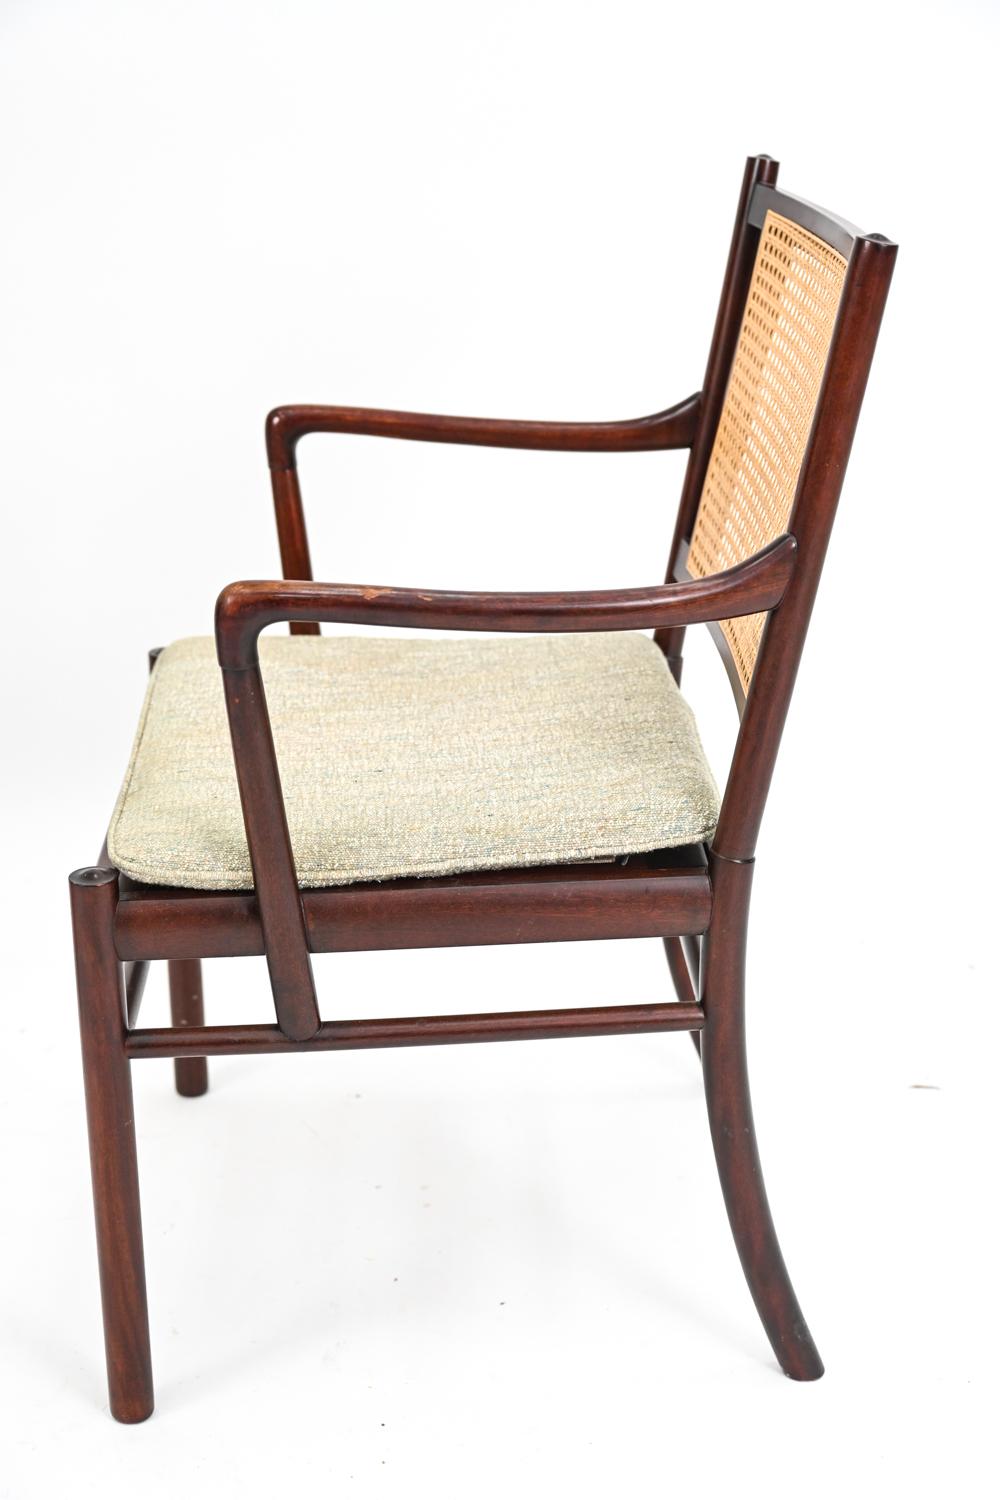 Cane Model PJ-301 Colonial Armchair by Ole Wanscher for Poul Jeppesen, 1960s